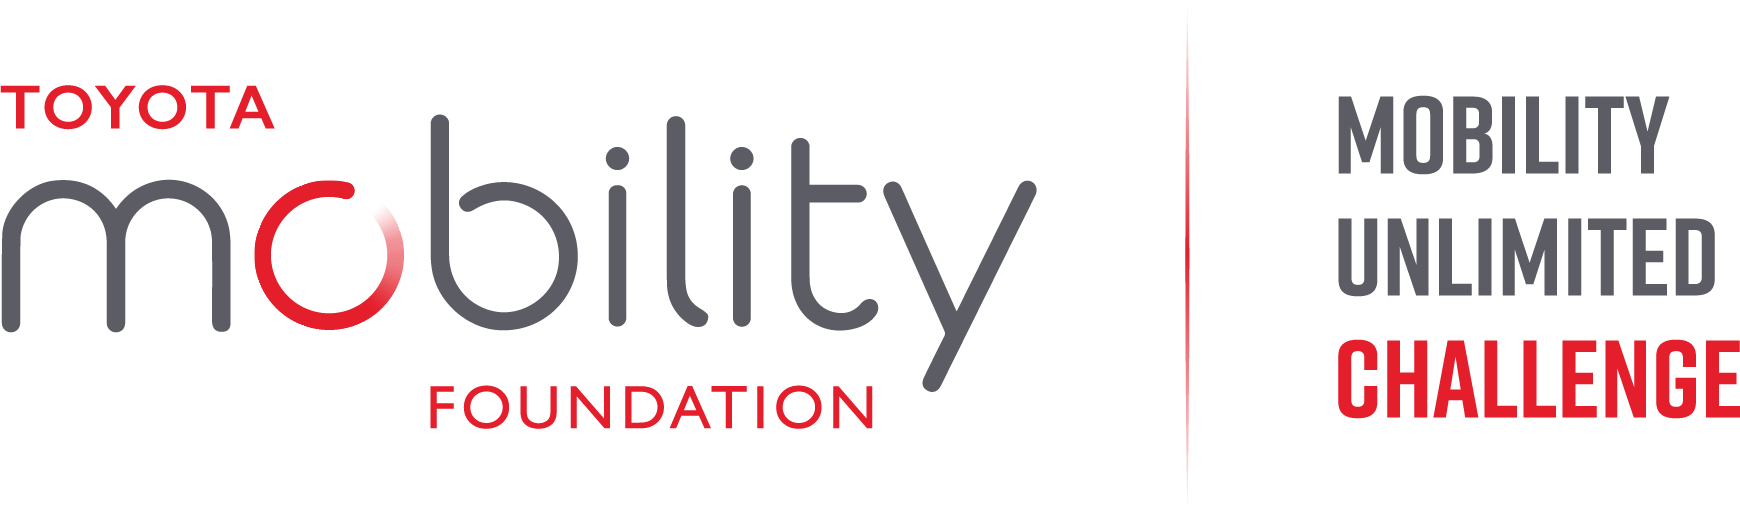 A M Mobility Logo - The Mobility Unlimited Challenge. Toyota Mobility Foundation